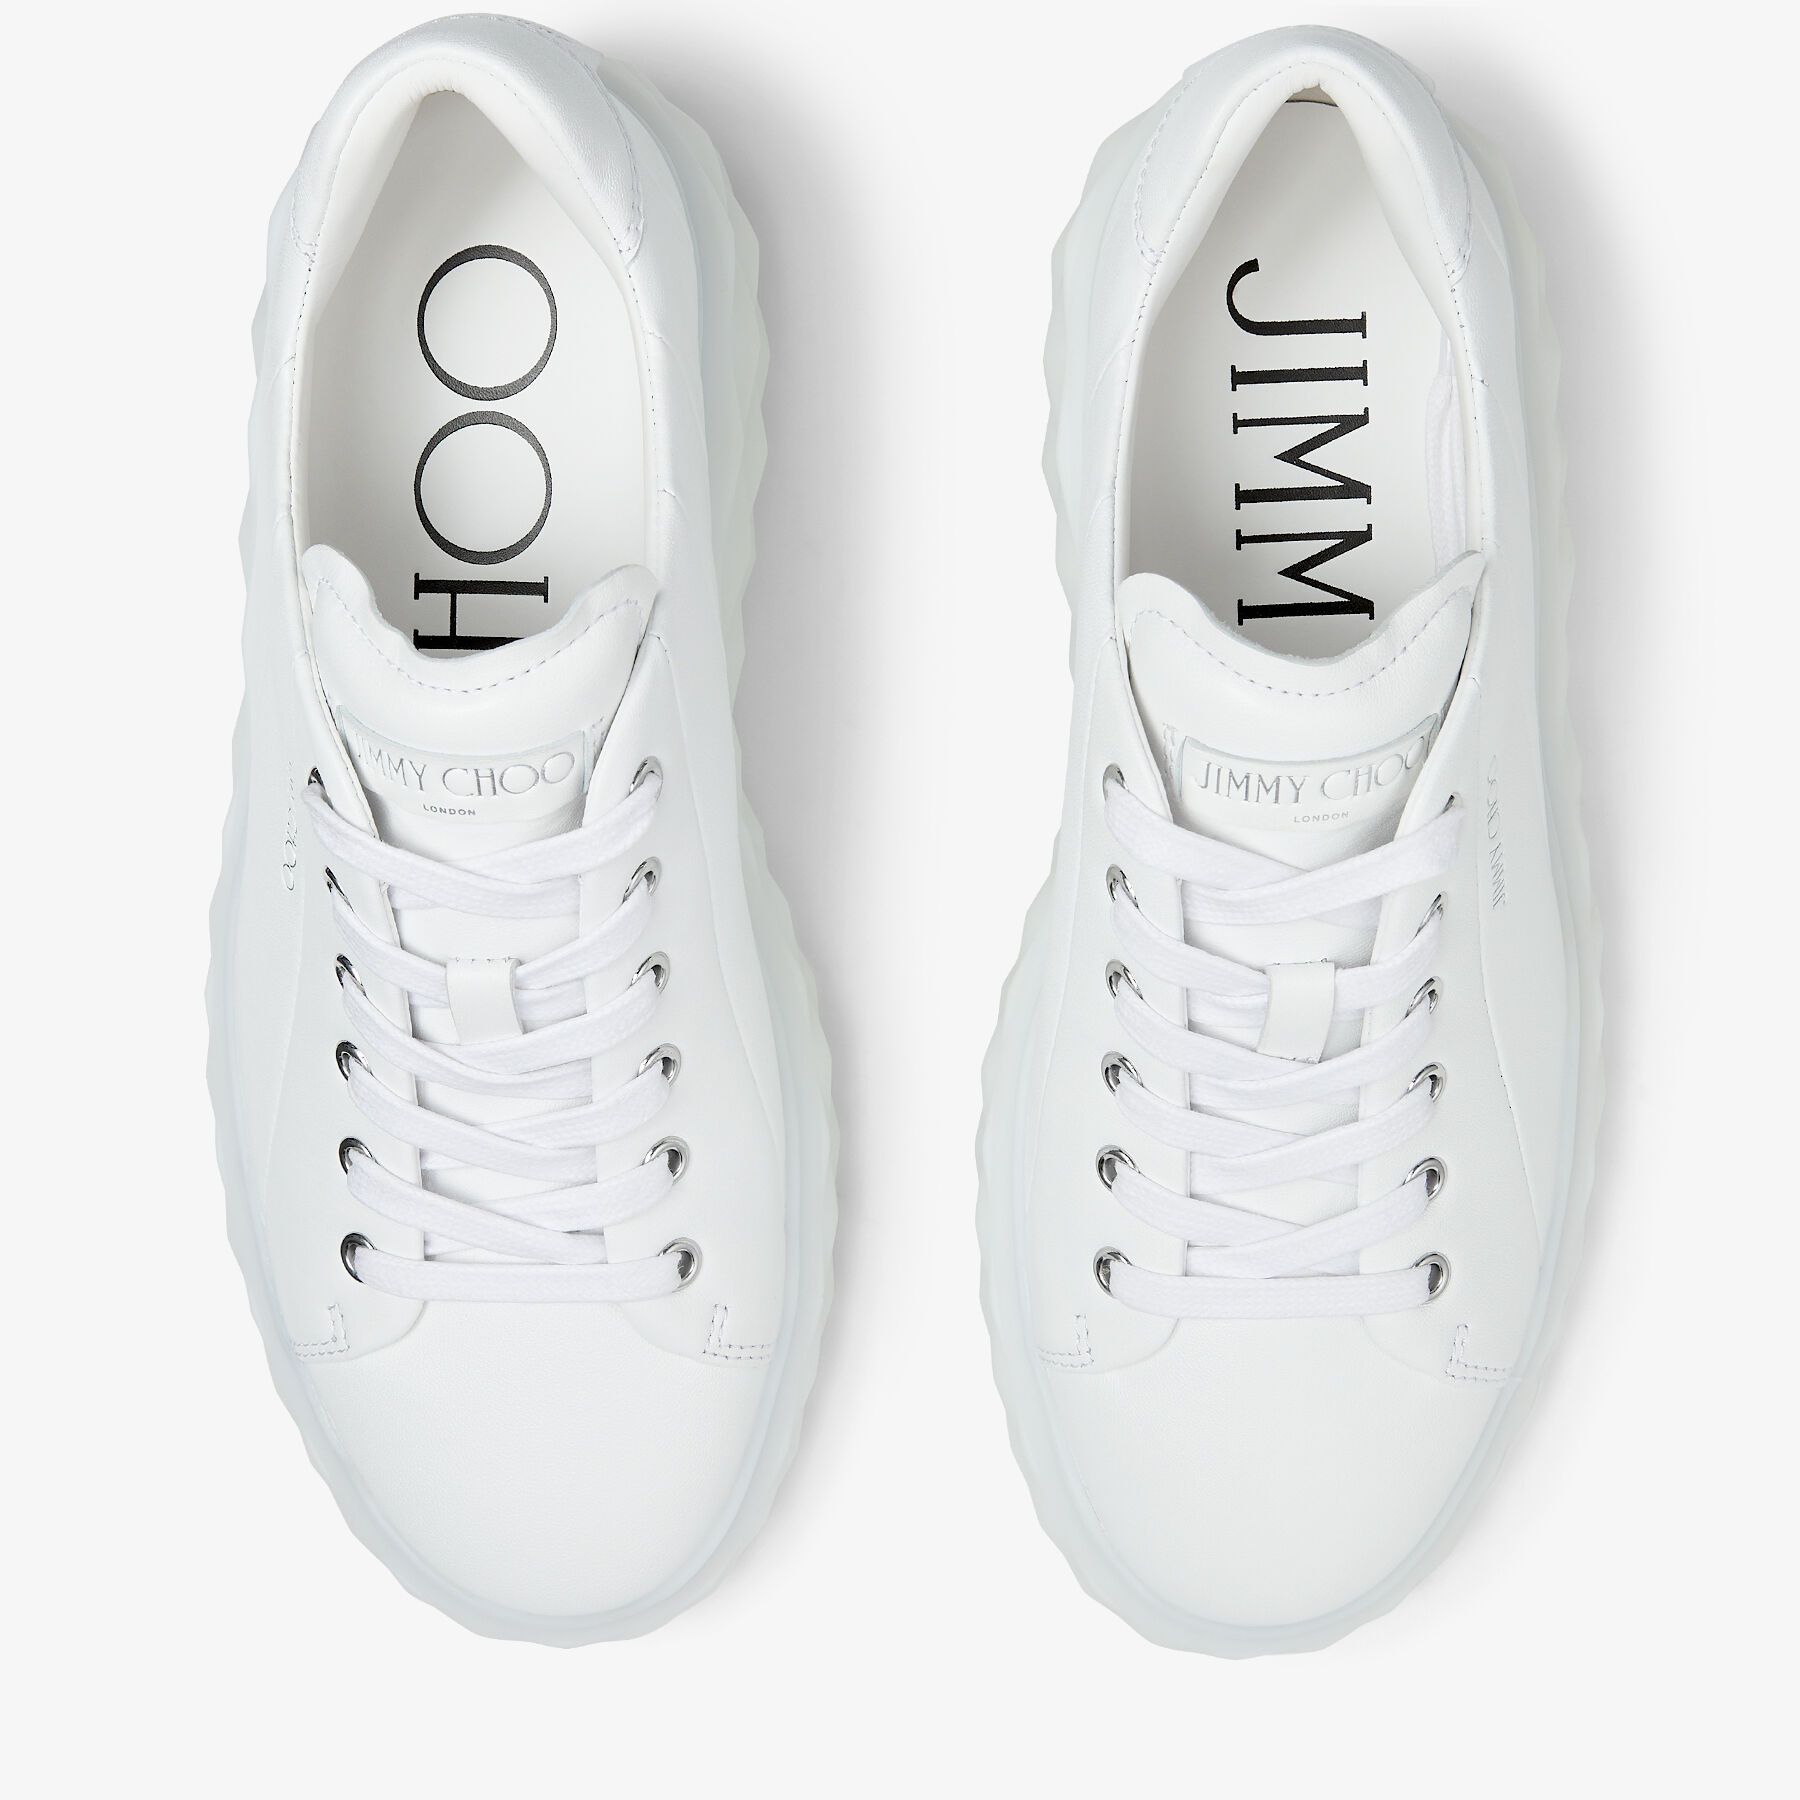 Diamond Light Maxi/F
White Nappa Leather Low-Top Trainers with Platform Sole - 5